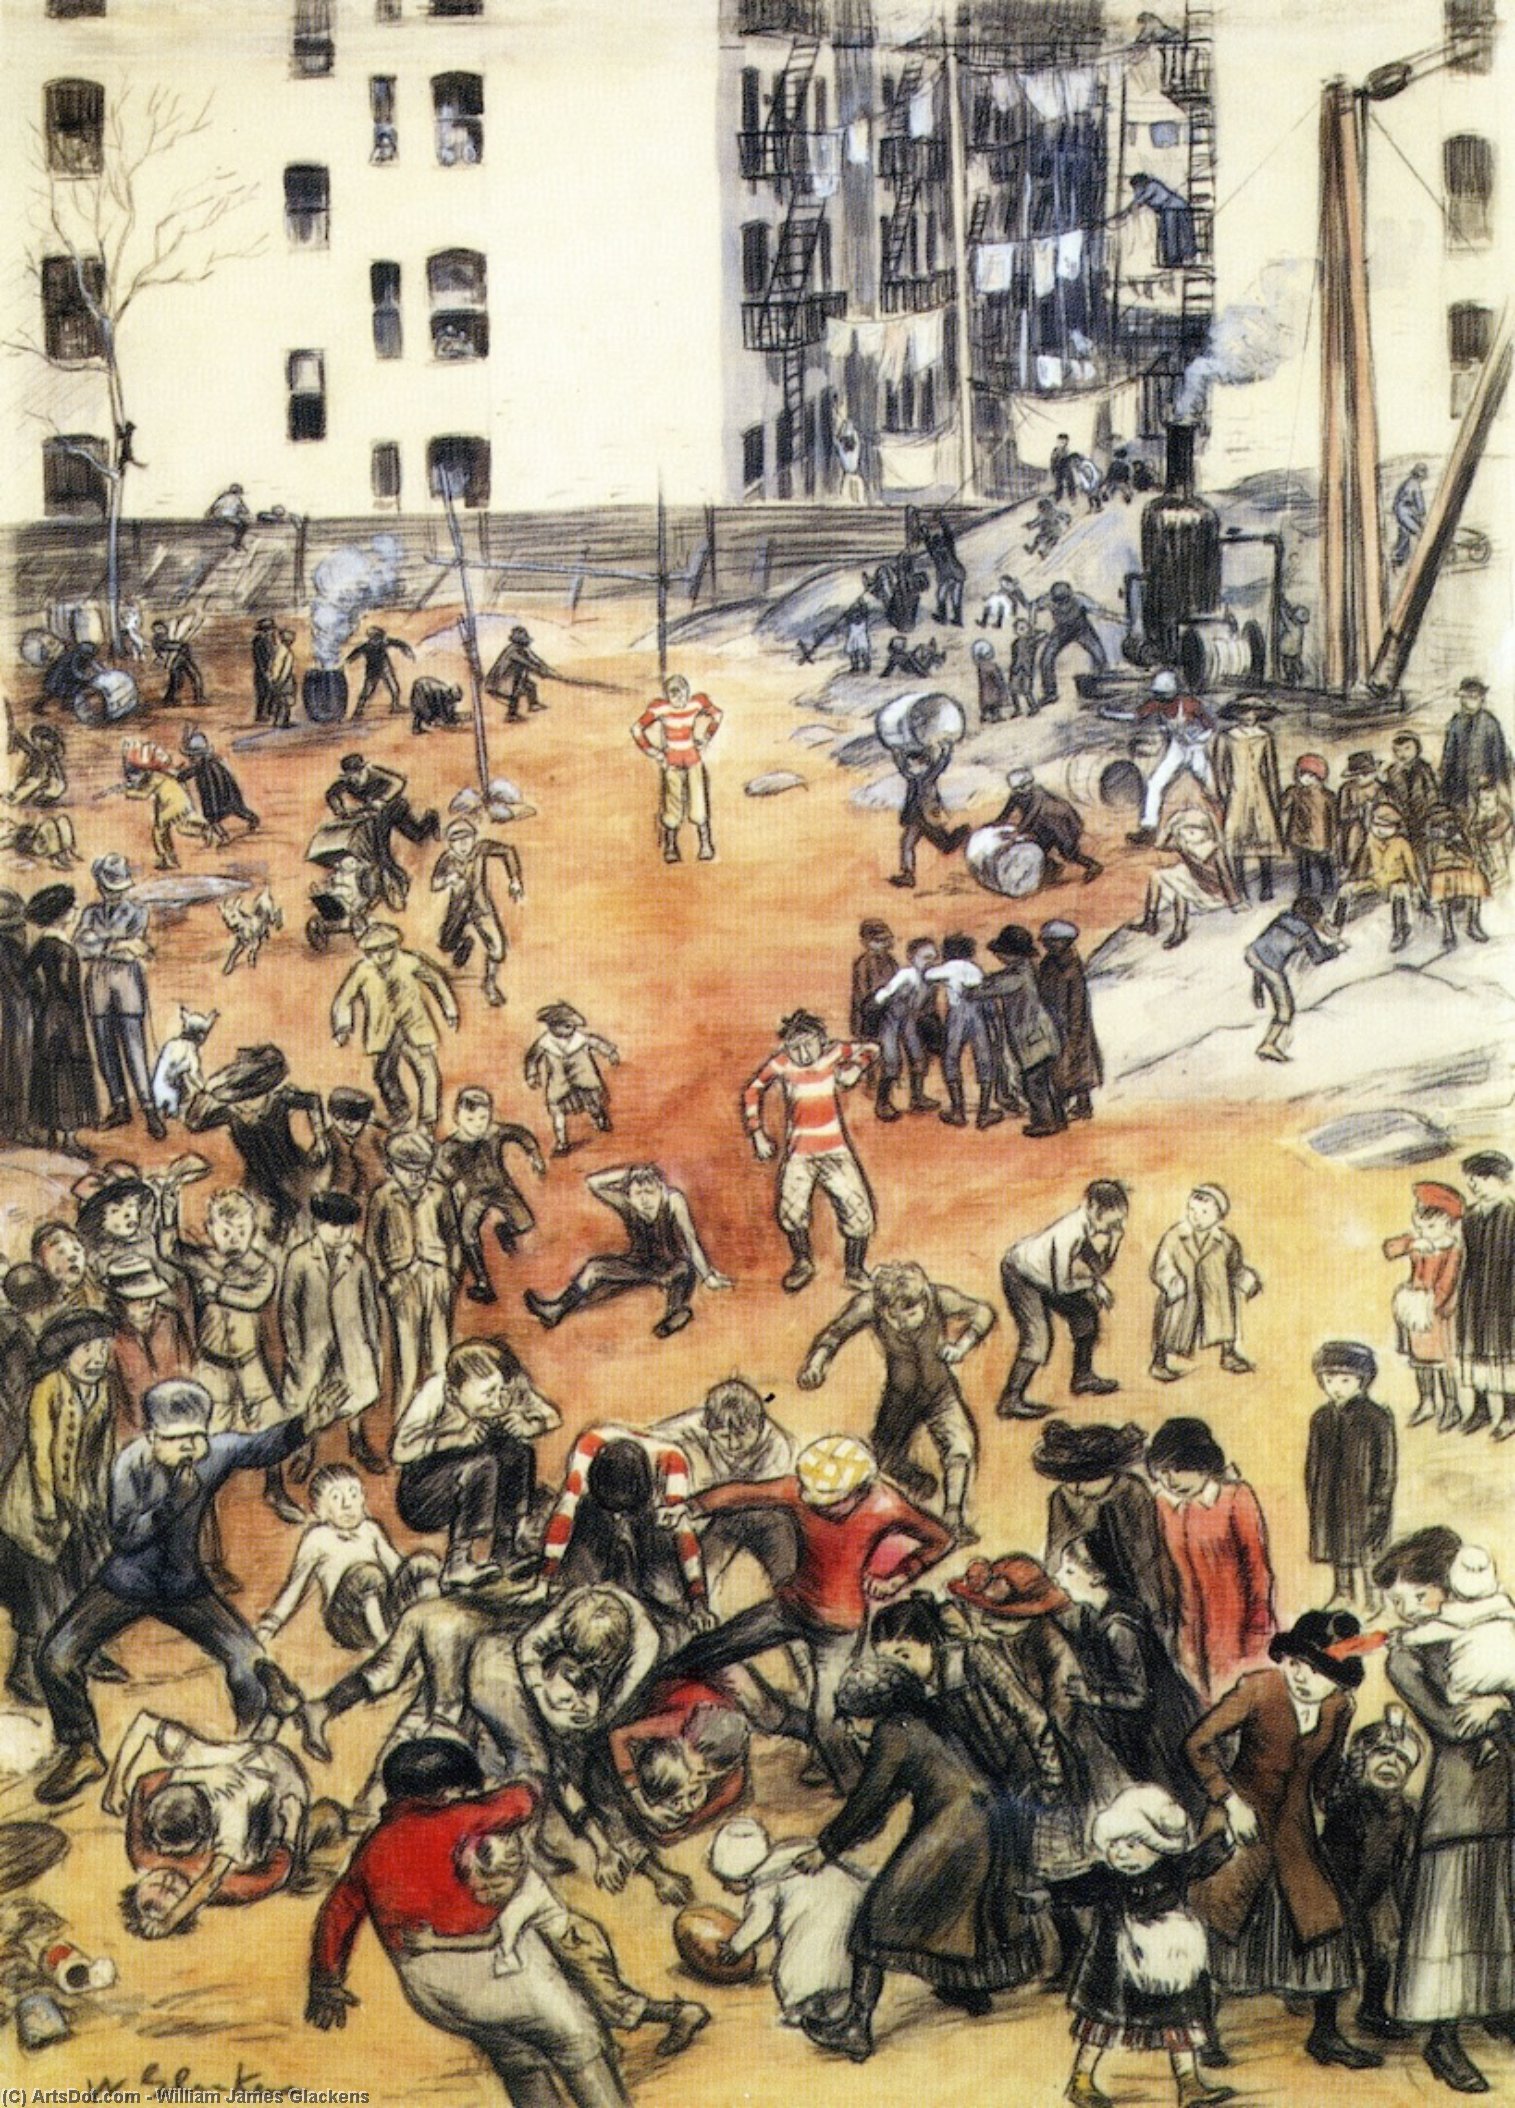 Buy Museum Art Reproductions For the Championship of the Back-Lot League (also known as A Football Game), 1911 by William James Glackens (1870-1938, United States) | ArtsDot.com